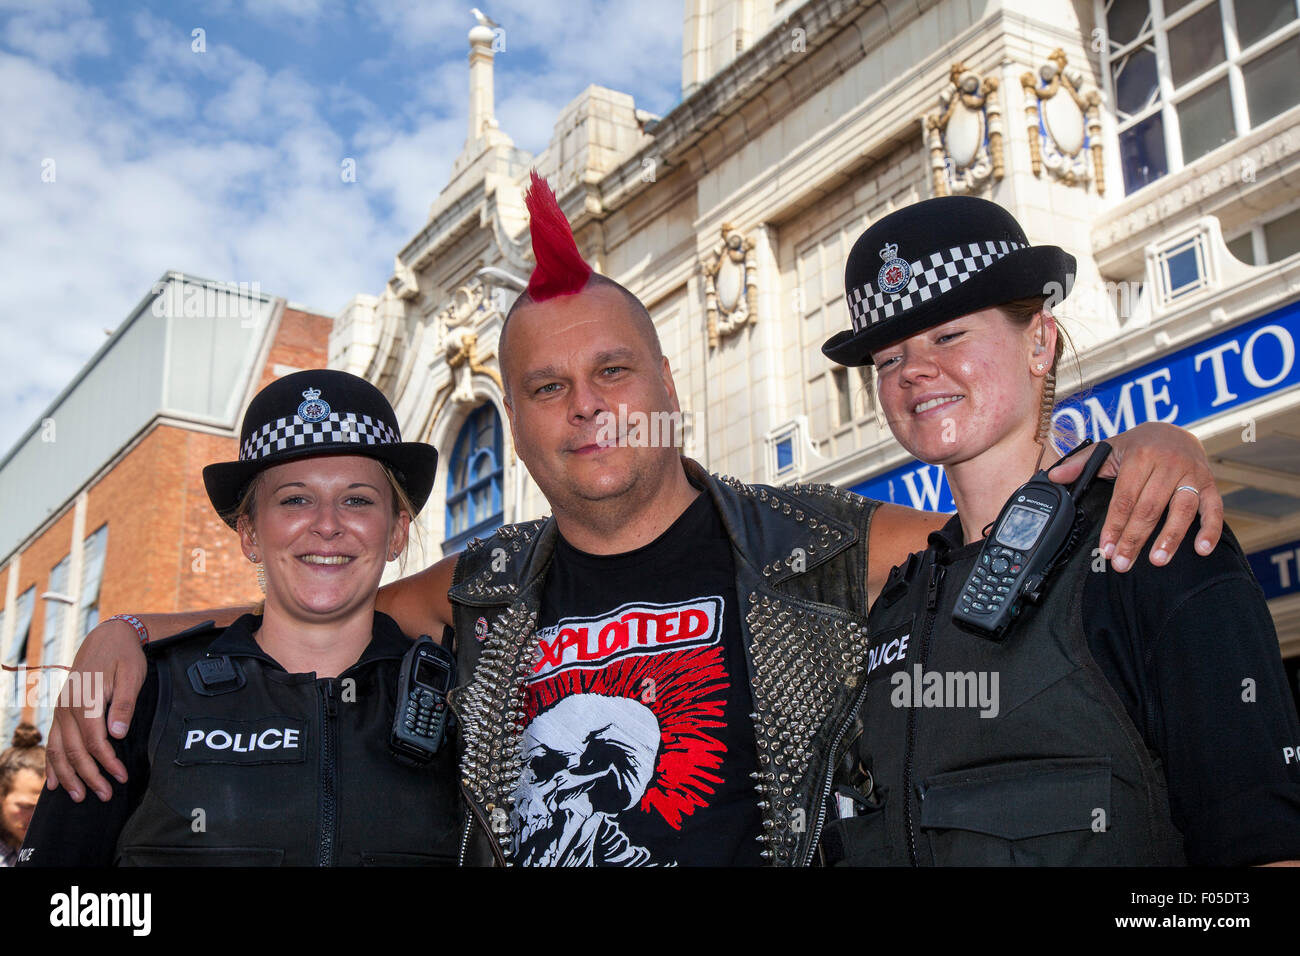 Punks with mohican  dyed mohican  hairstyle at Blackpool 